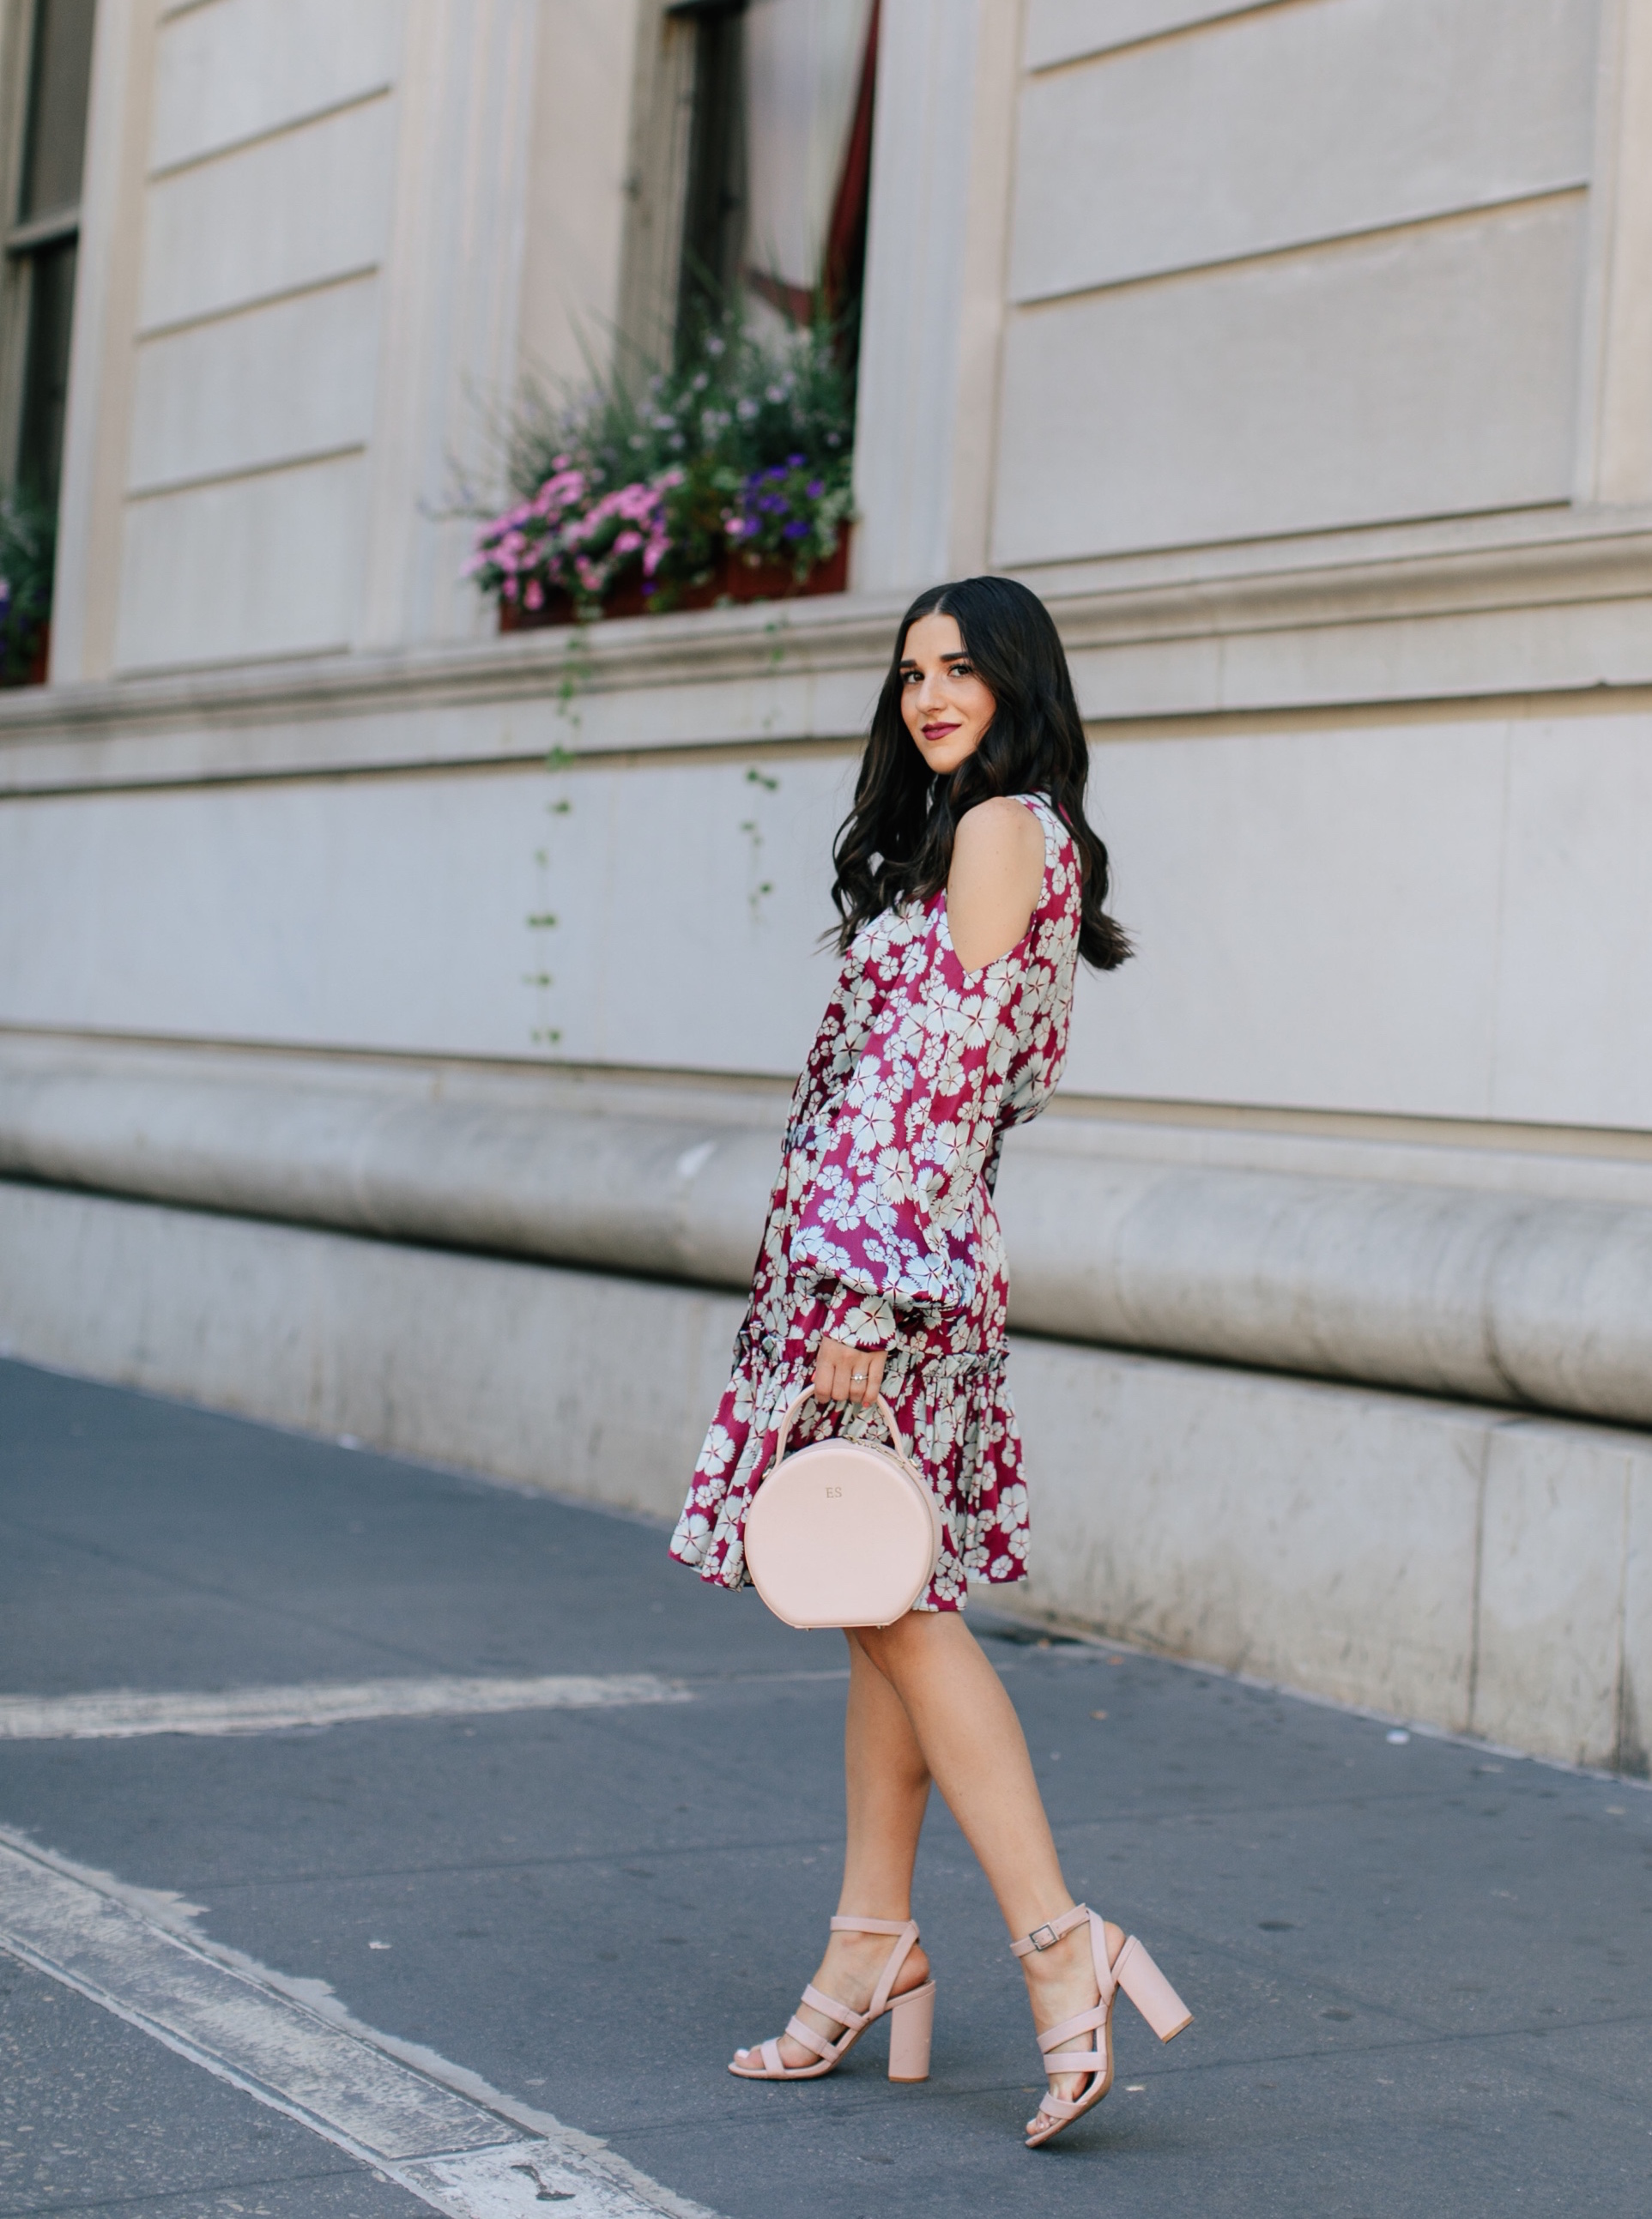 A Blogger’s Guide To Turning Your S.O. Into Your Photographer Cold Shoulder Floral Dress Esther Santer Fashion Blog NYC Street Style Blogger Outfit OOTD Trendy Designer Nordstrom Strappy Blush Pink Heels Circle Bag Shopping Wavy Hair Diamond  Jewelry.jpg